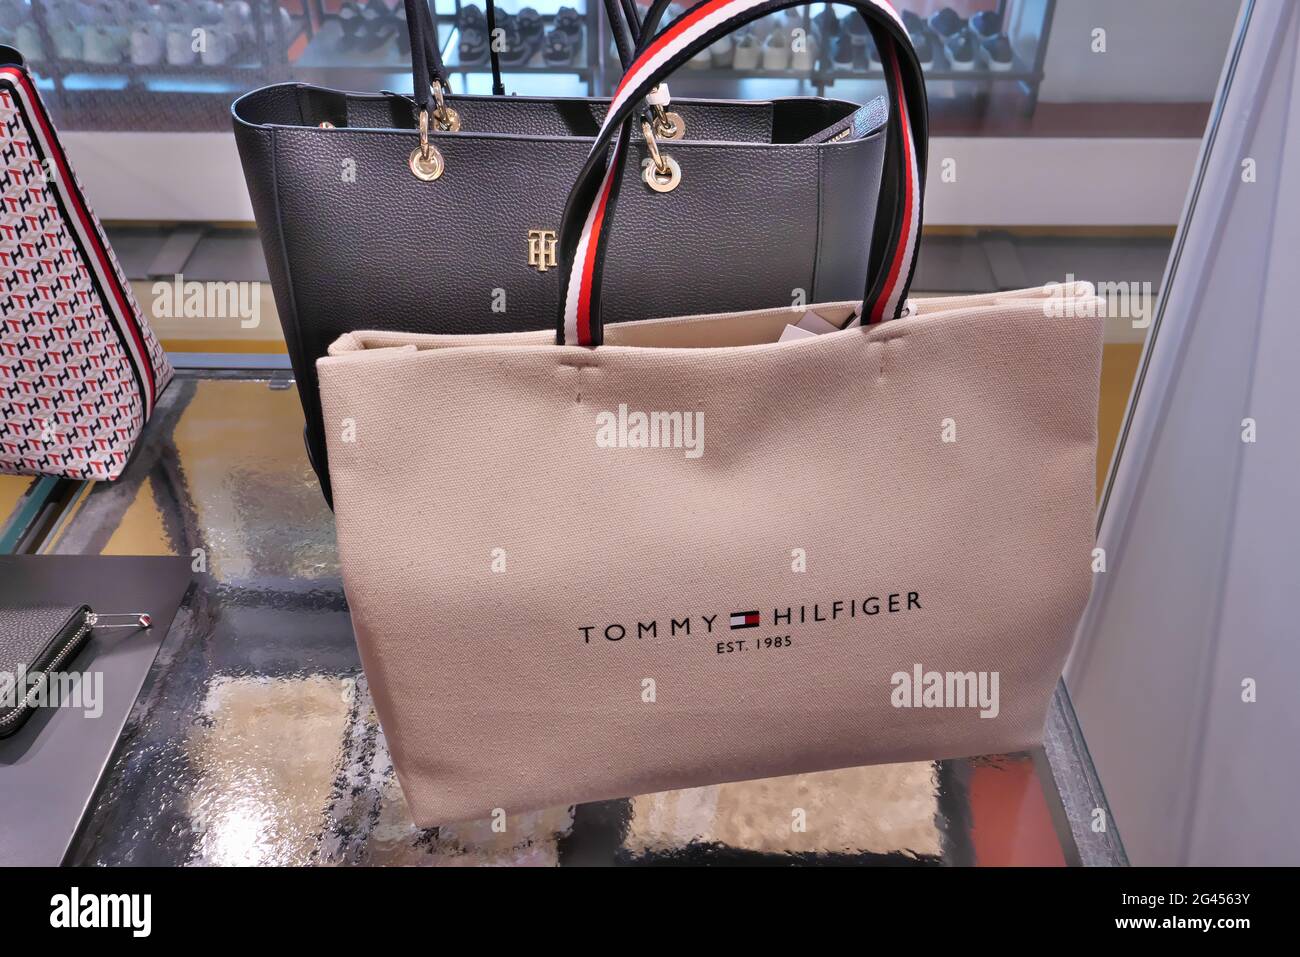 BAG ON DISPLAY AT TOMMY HILFIGER BOUTIQUE INSIDE THE RINASCENTE FASHION  STORE Stock Photo - Alamy